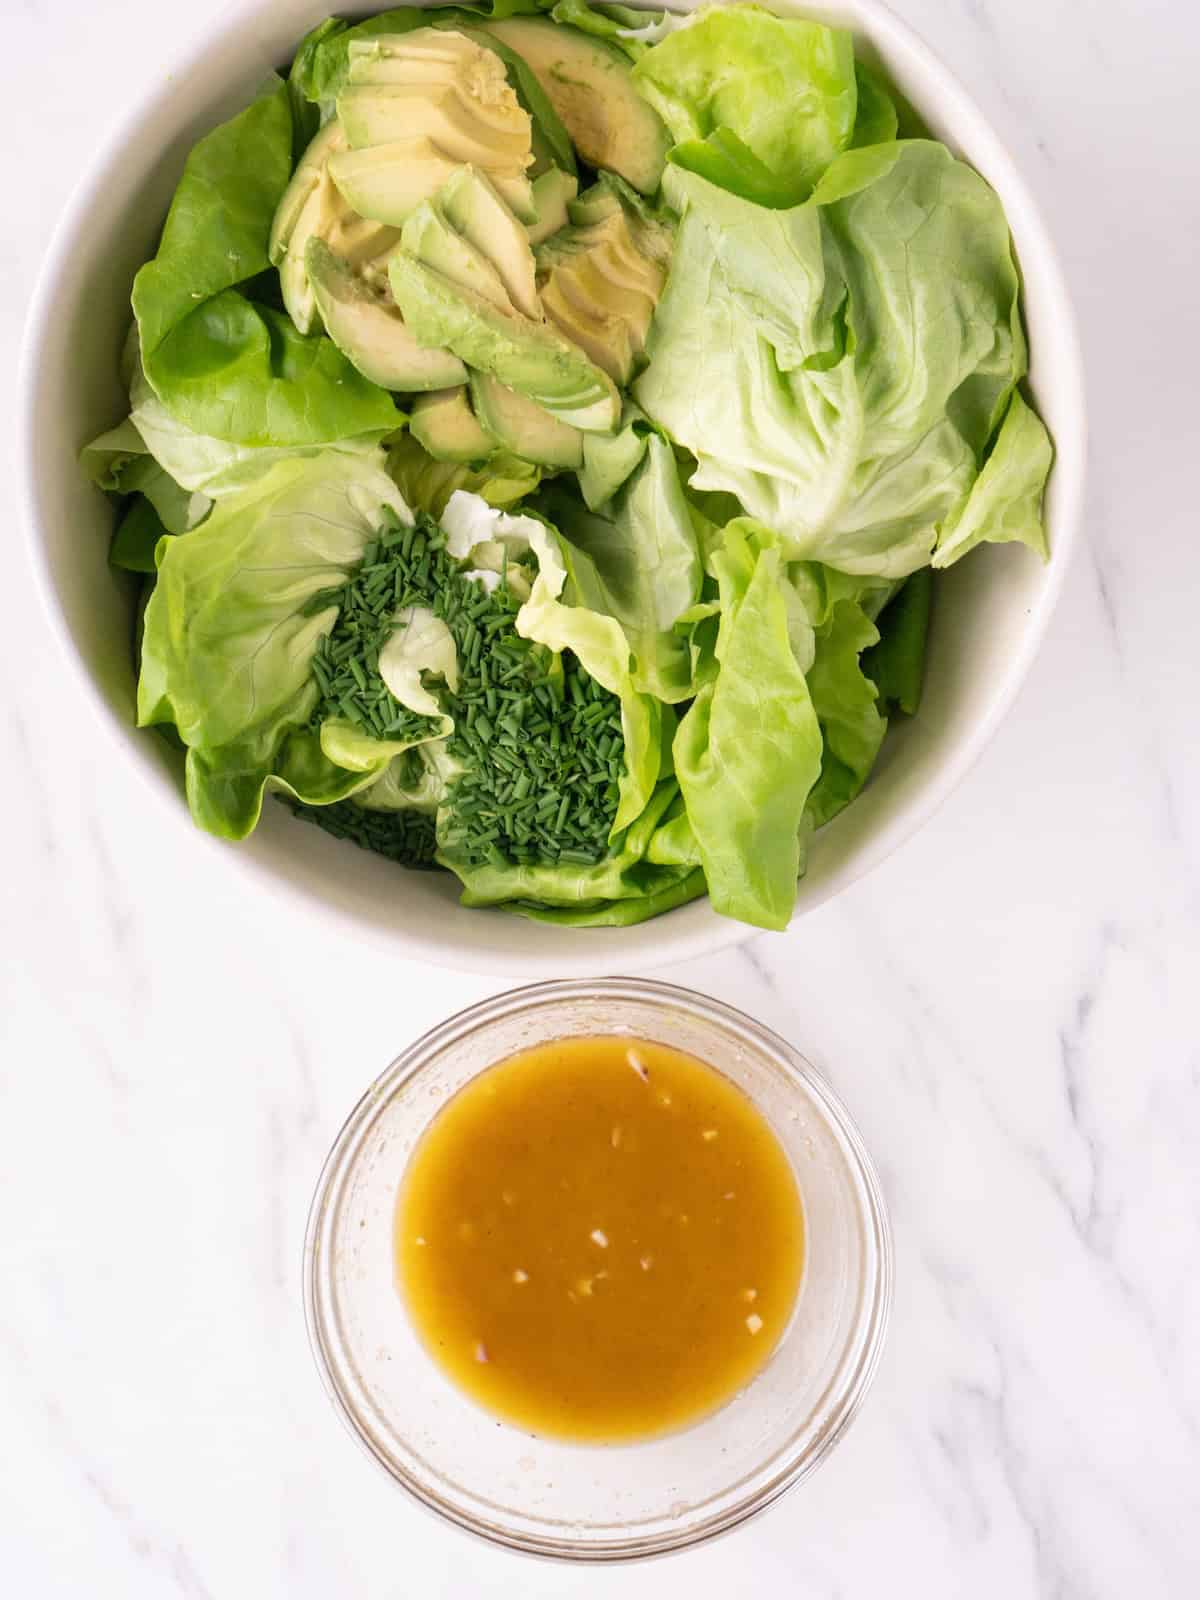 A bowl with butter lettuce, chopped chives and sliced avocado to make a butter lettuce salad, along with a glass bowl with lemon shallot vinaigrette on the side.